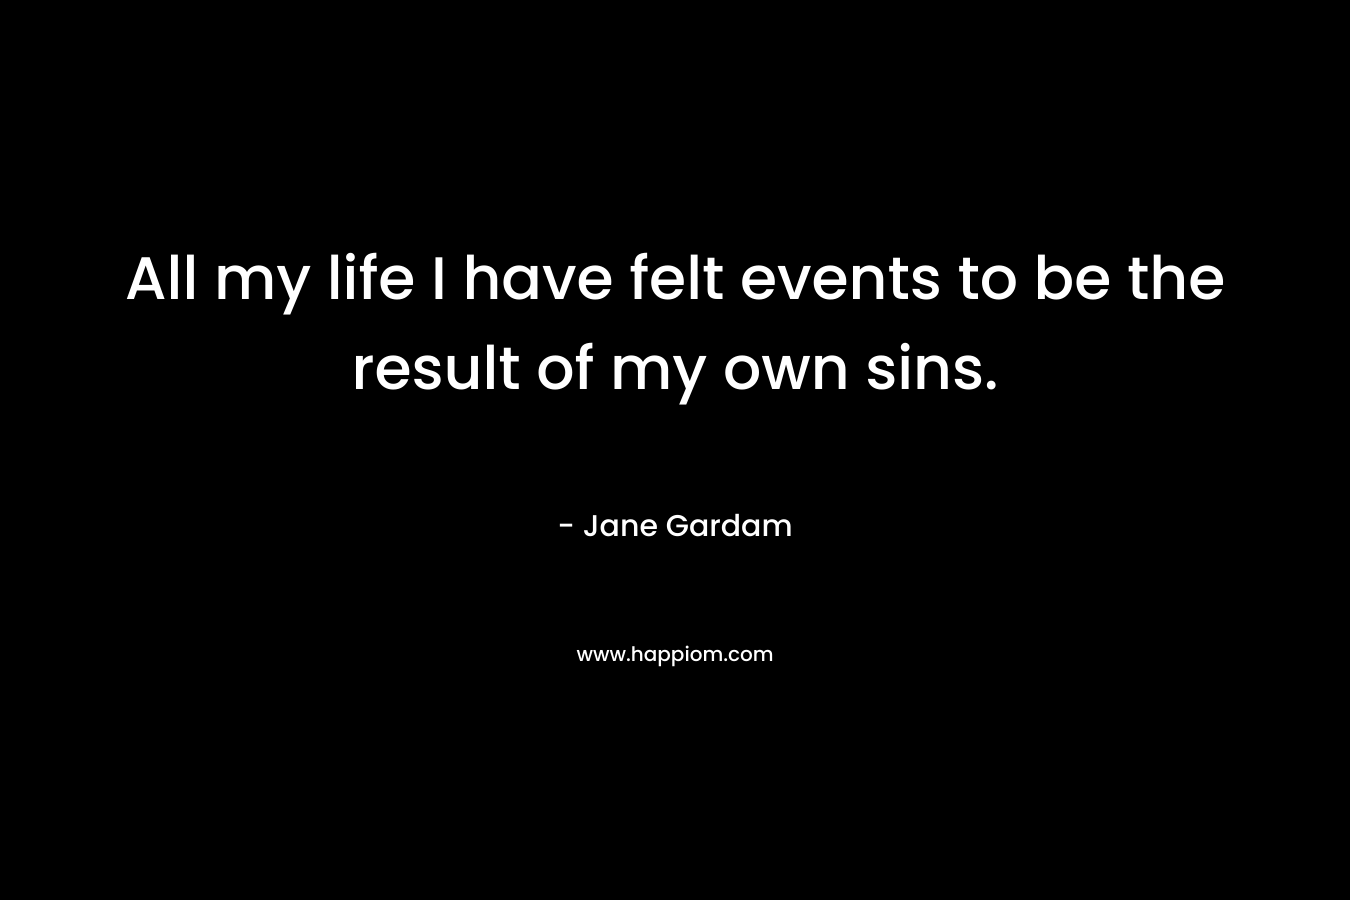 All my life I have felt events to be the result of my own sins. – Jane Gardam